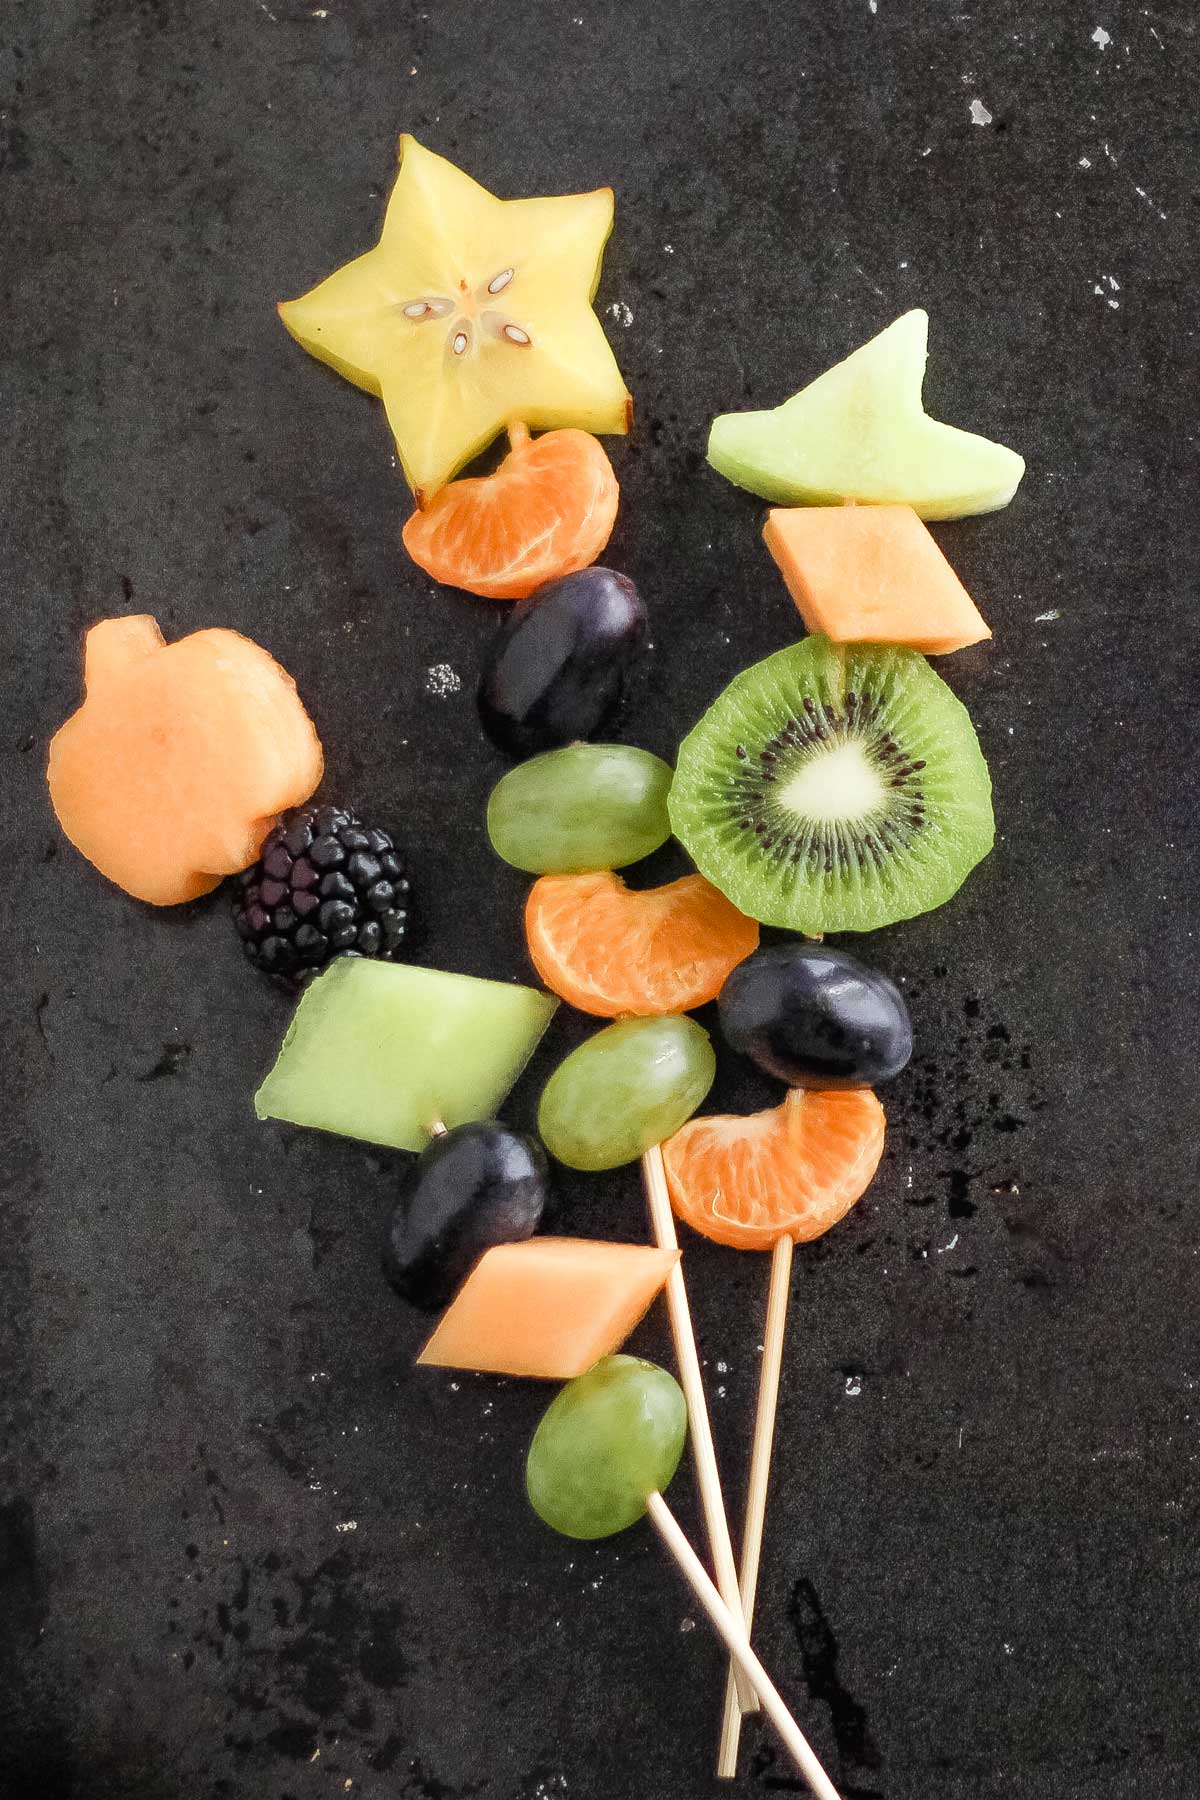 3 skewers with fruit chunks, each topped with a Halloween shape (pumpkin, star and witch's hat).